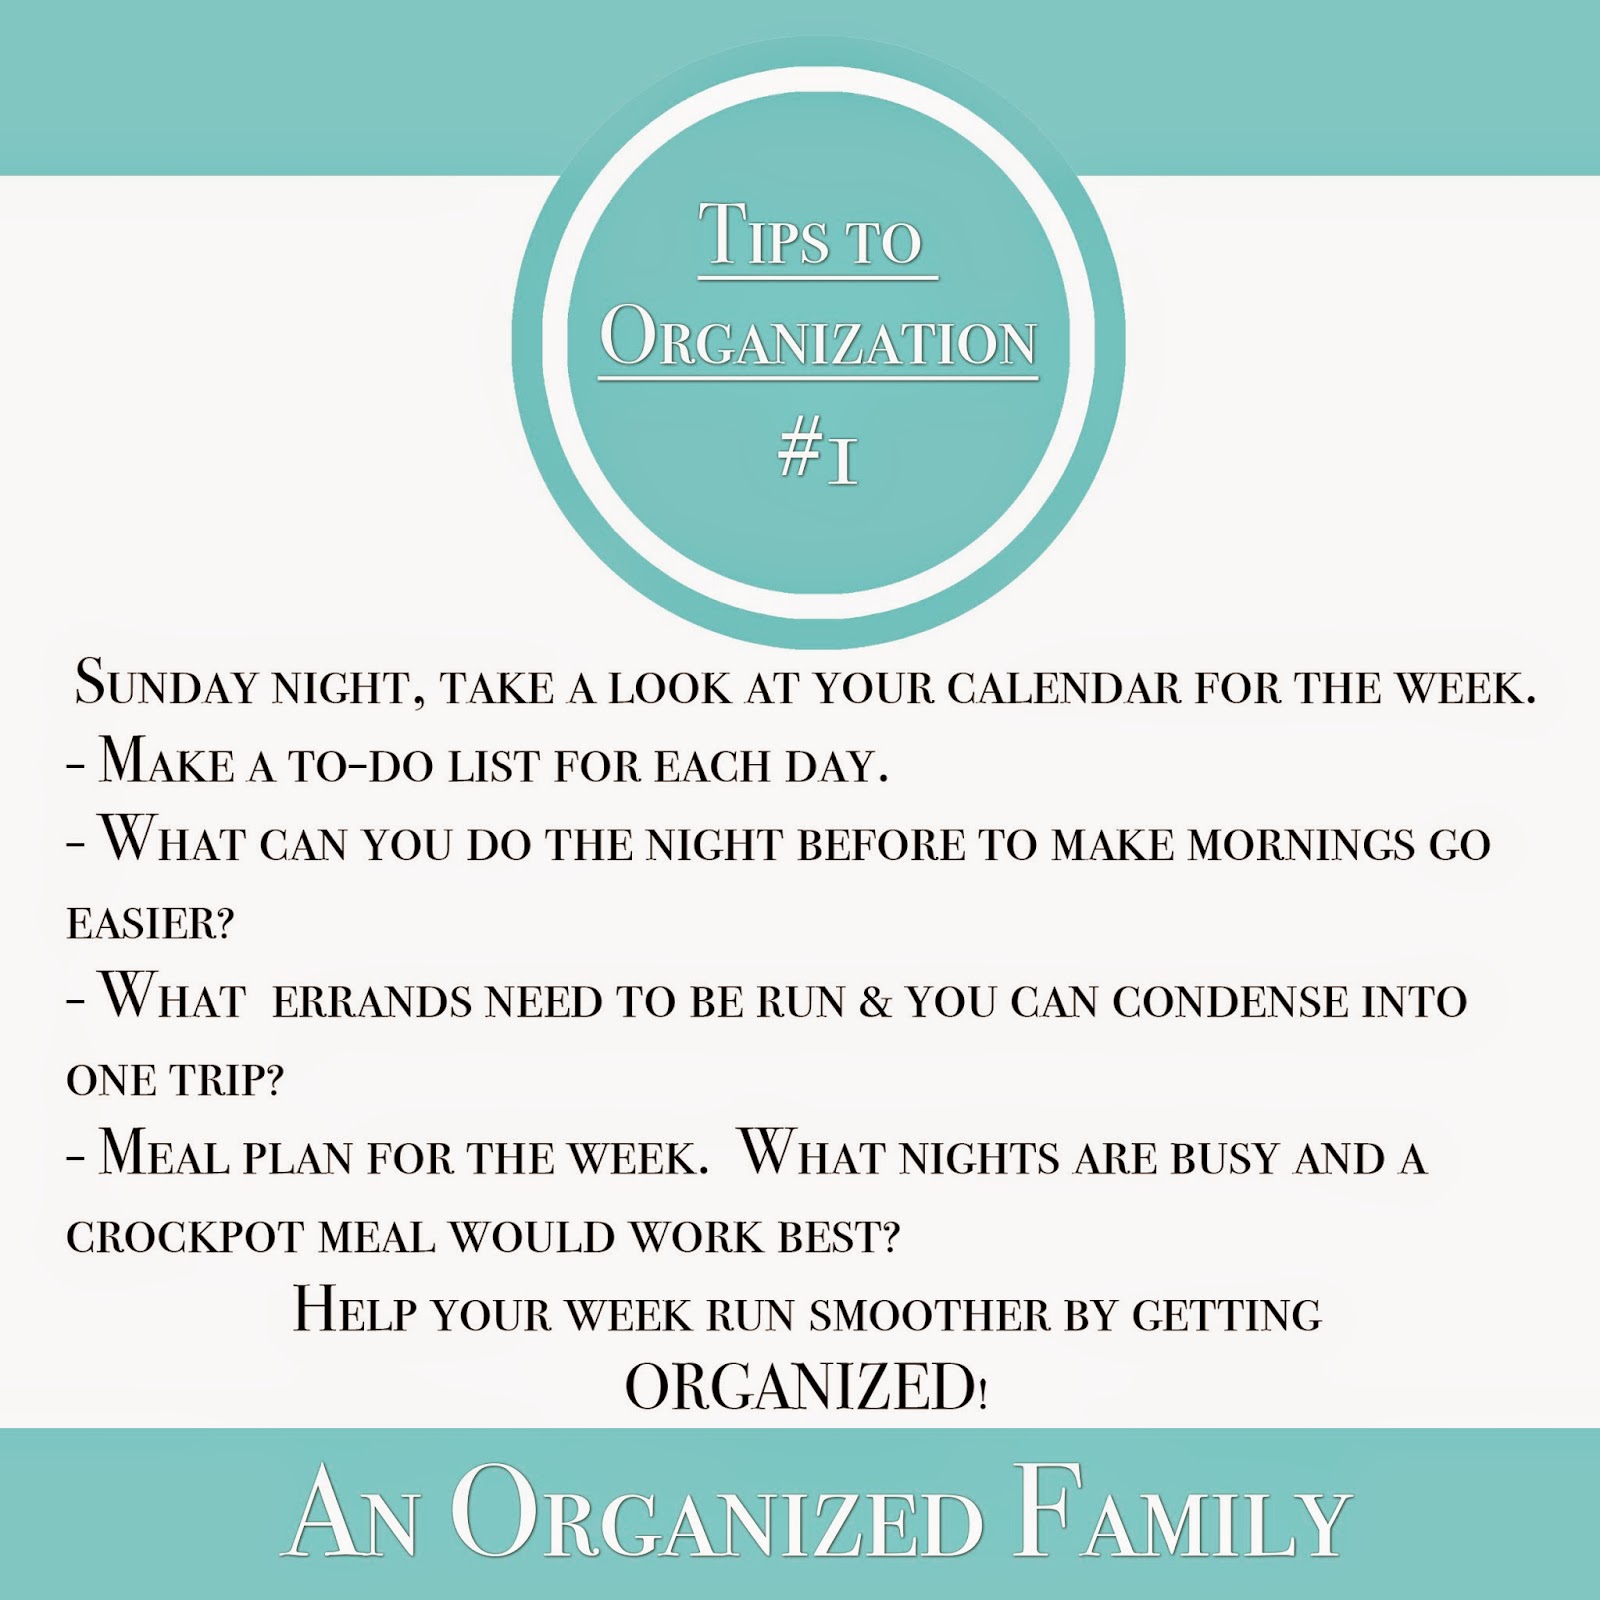 Tips to organization - Plan out your week